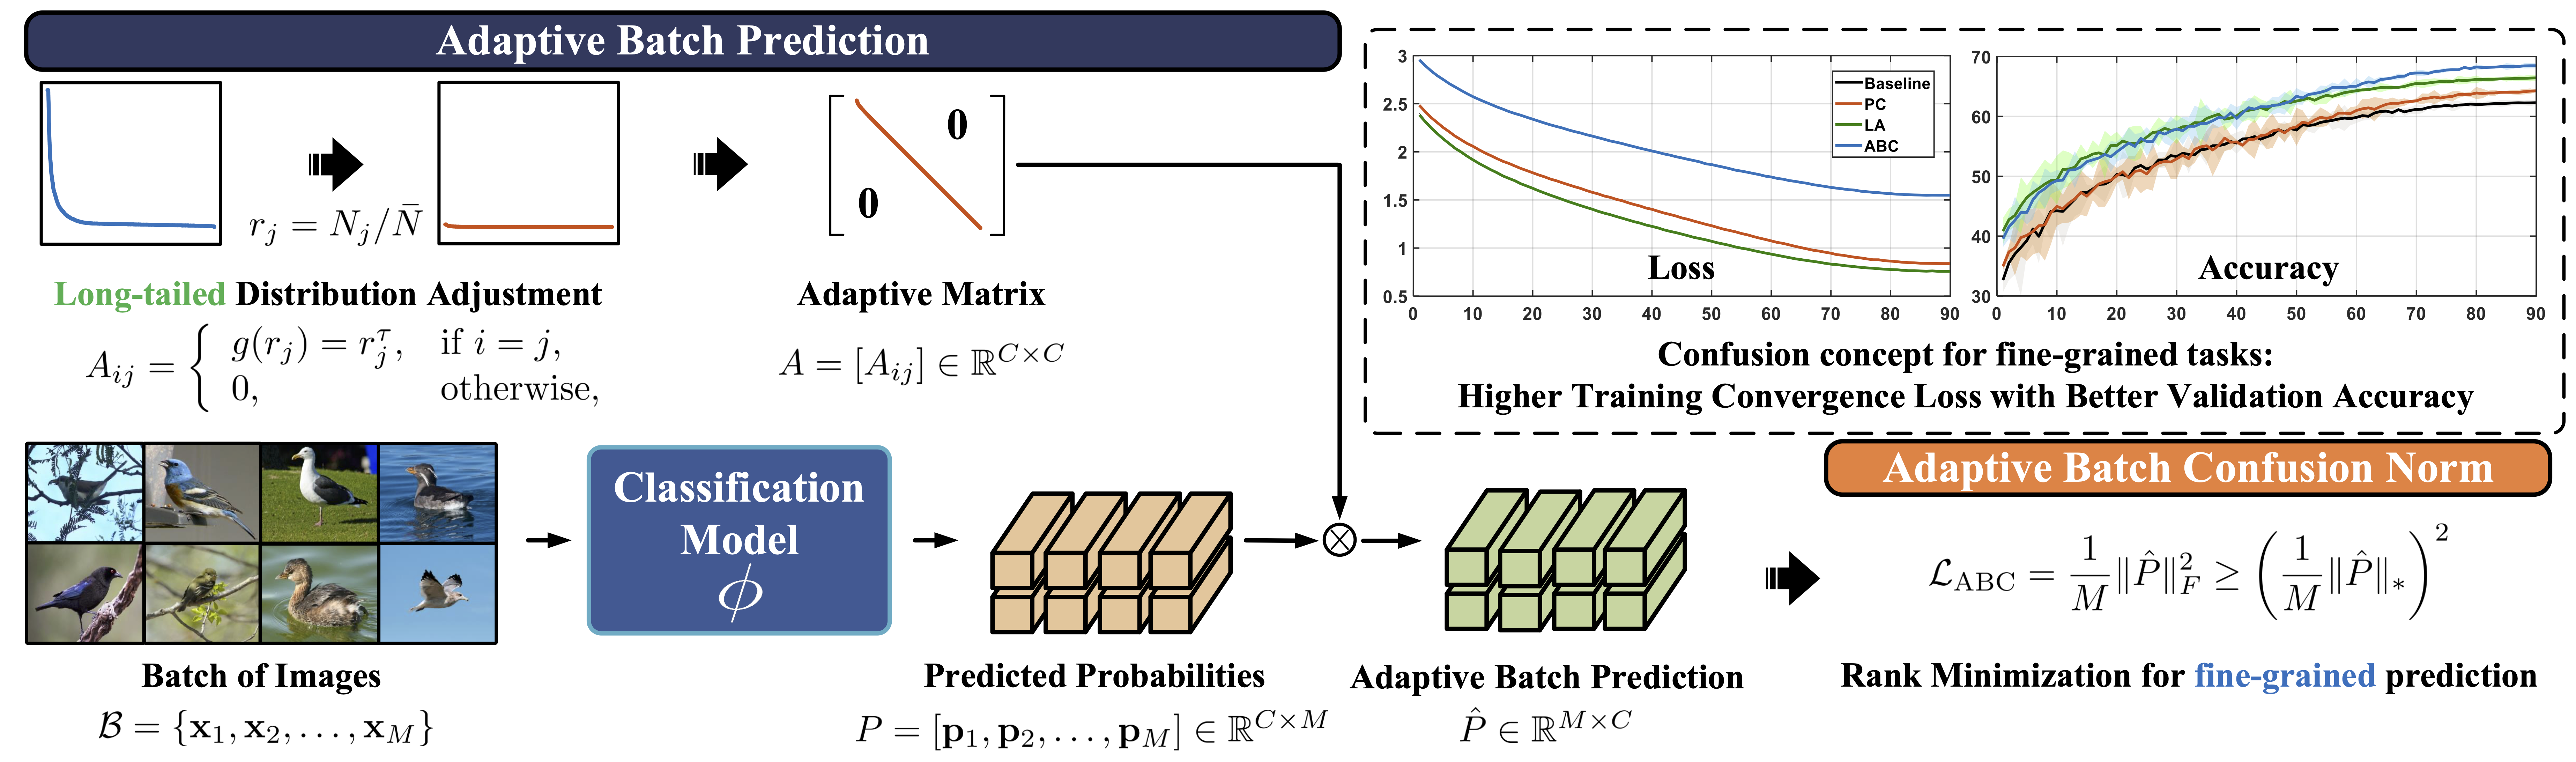 Figure 2: Overview of adaptive batch confusion norm (ABC-Norm).